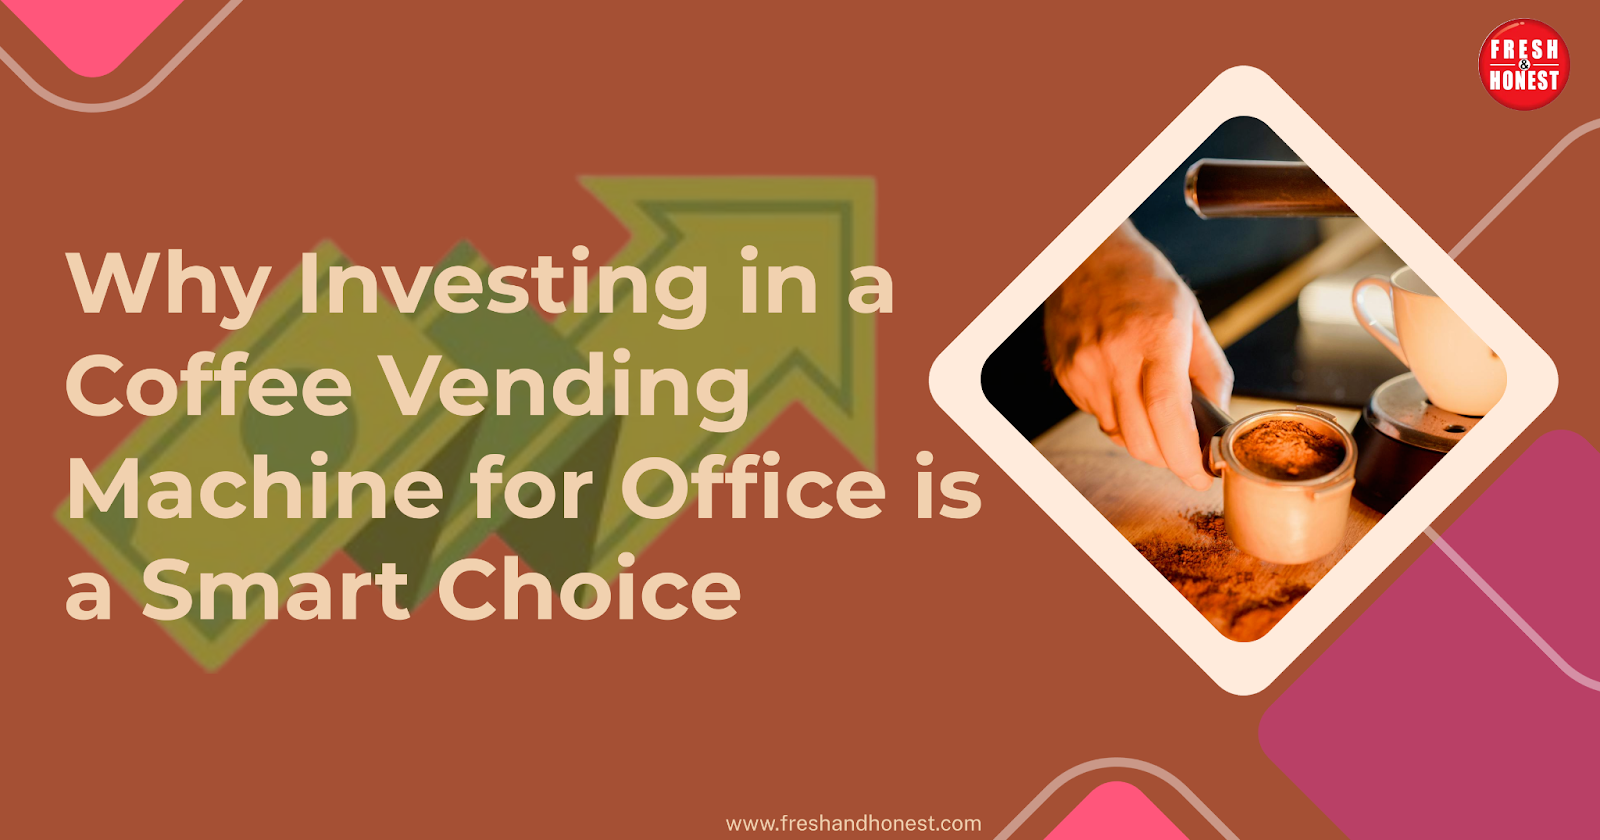 Investing in a Coffee Vending Machine for Office | Fresh and Honest